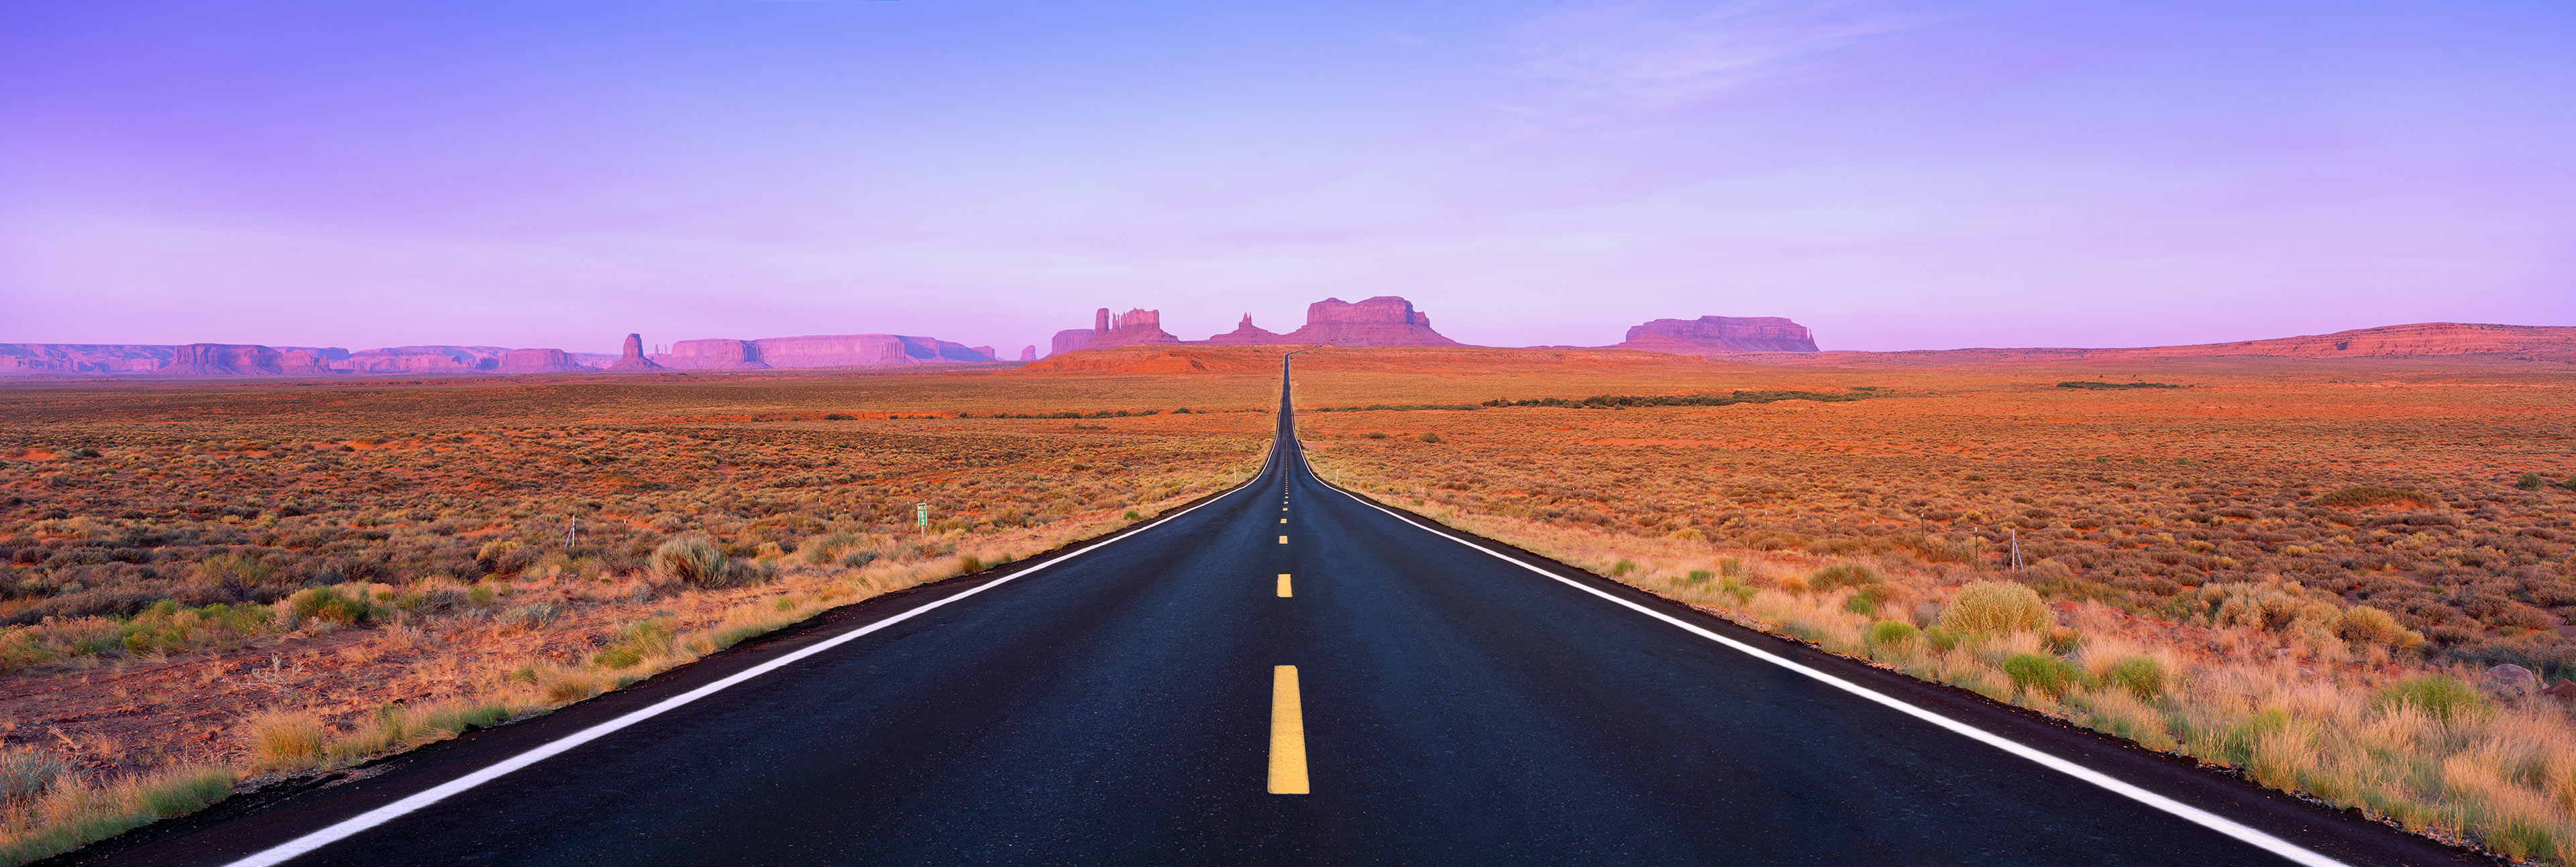 Monument Valley Road - Max 2 final